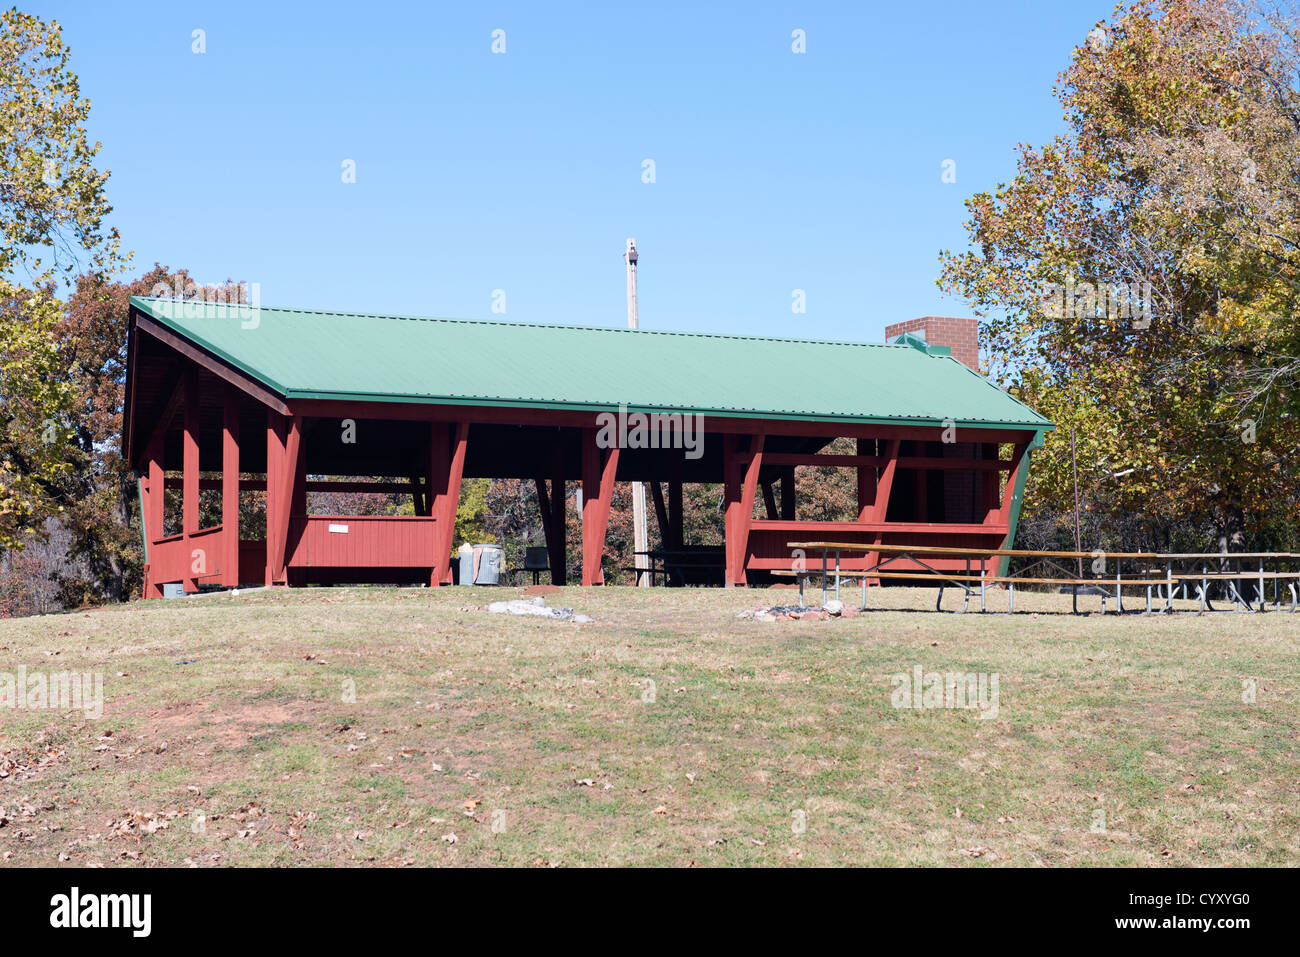 A picnic shelter house available for rental at Arcadia Lake in Oklahoma, USA, in the autumn. Stock Photo